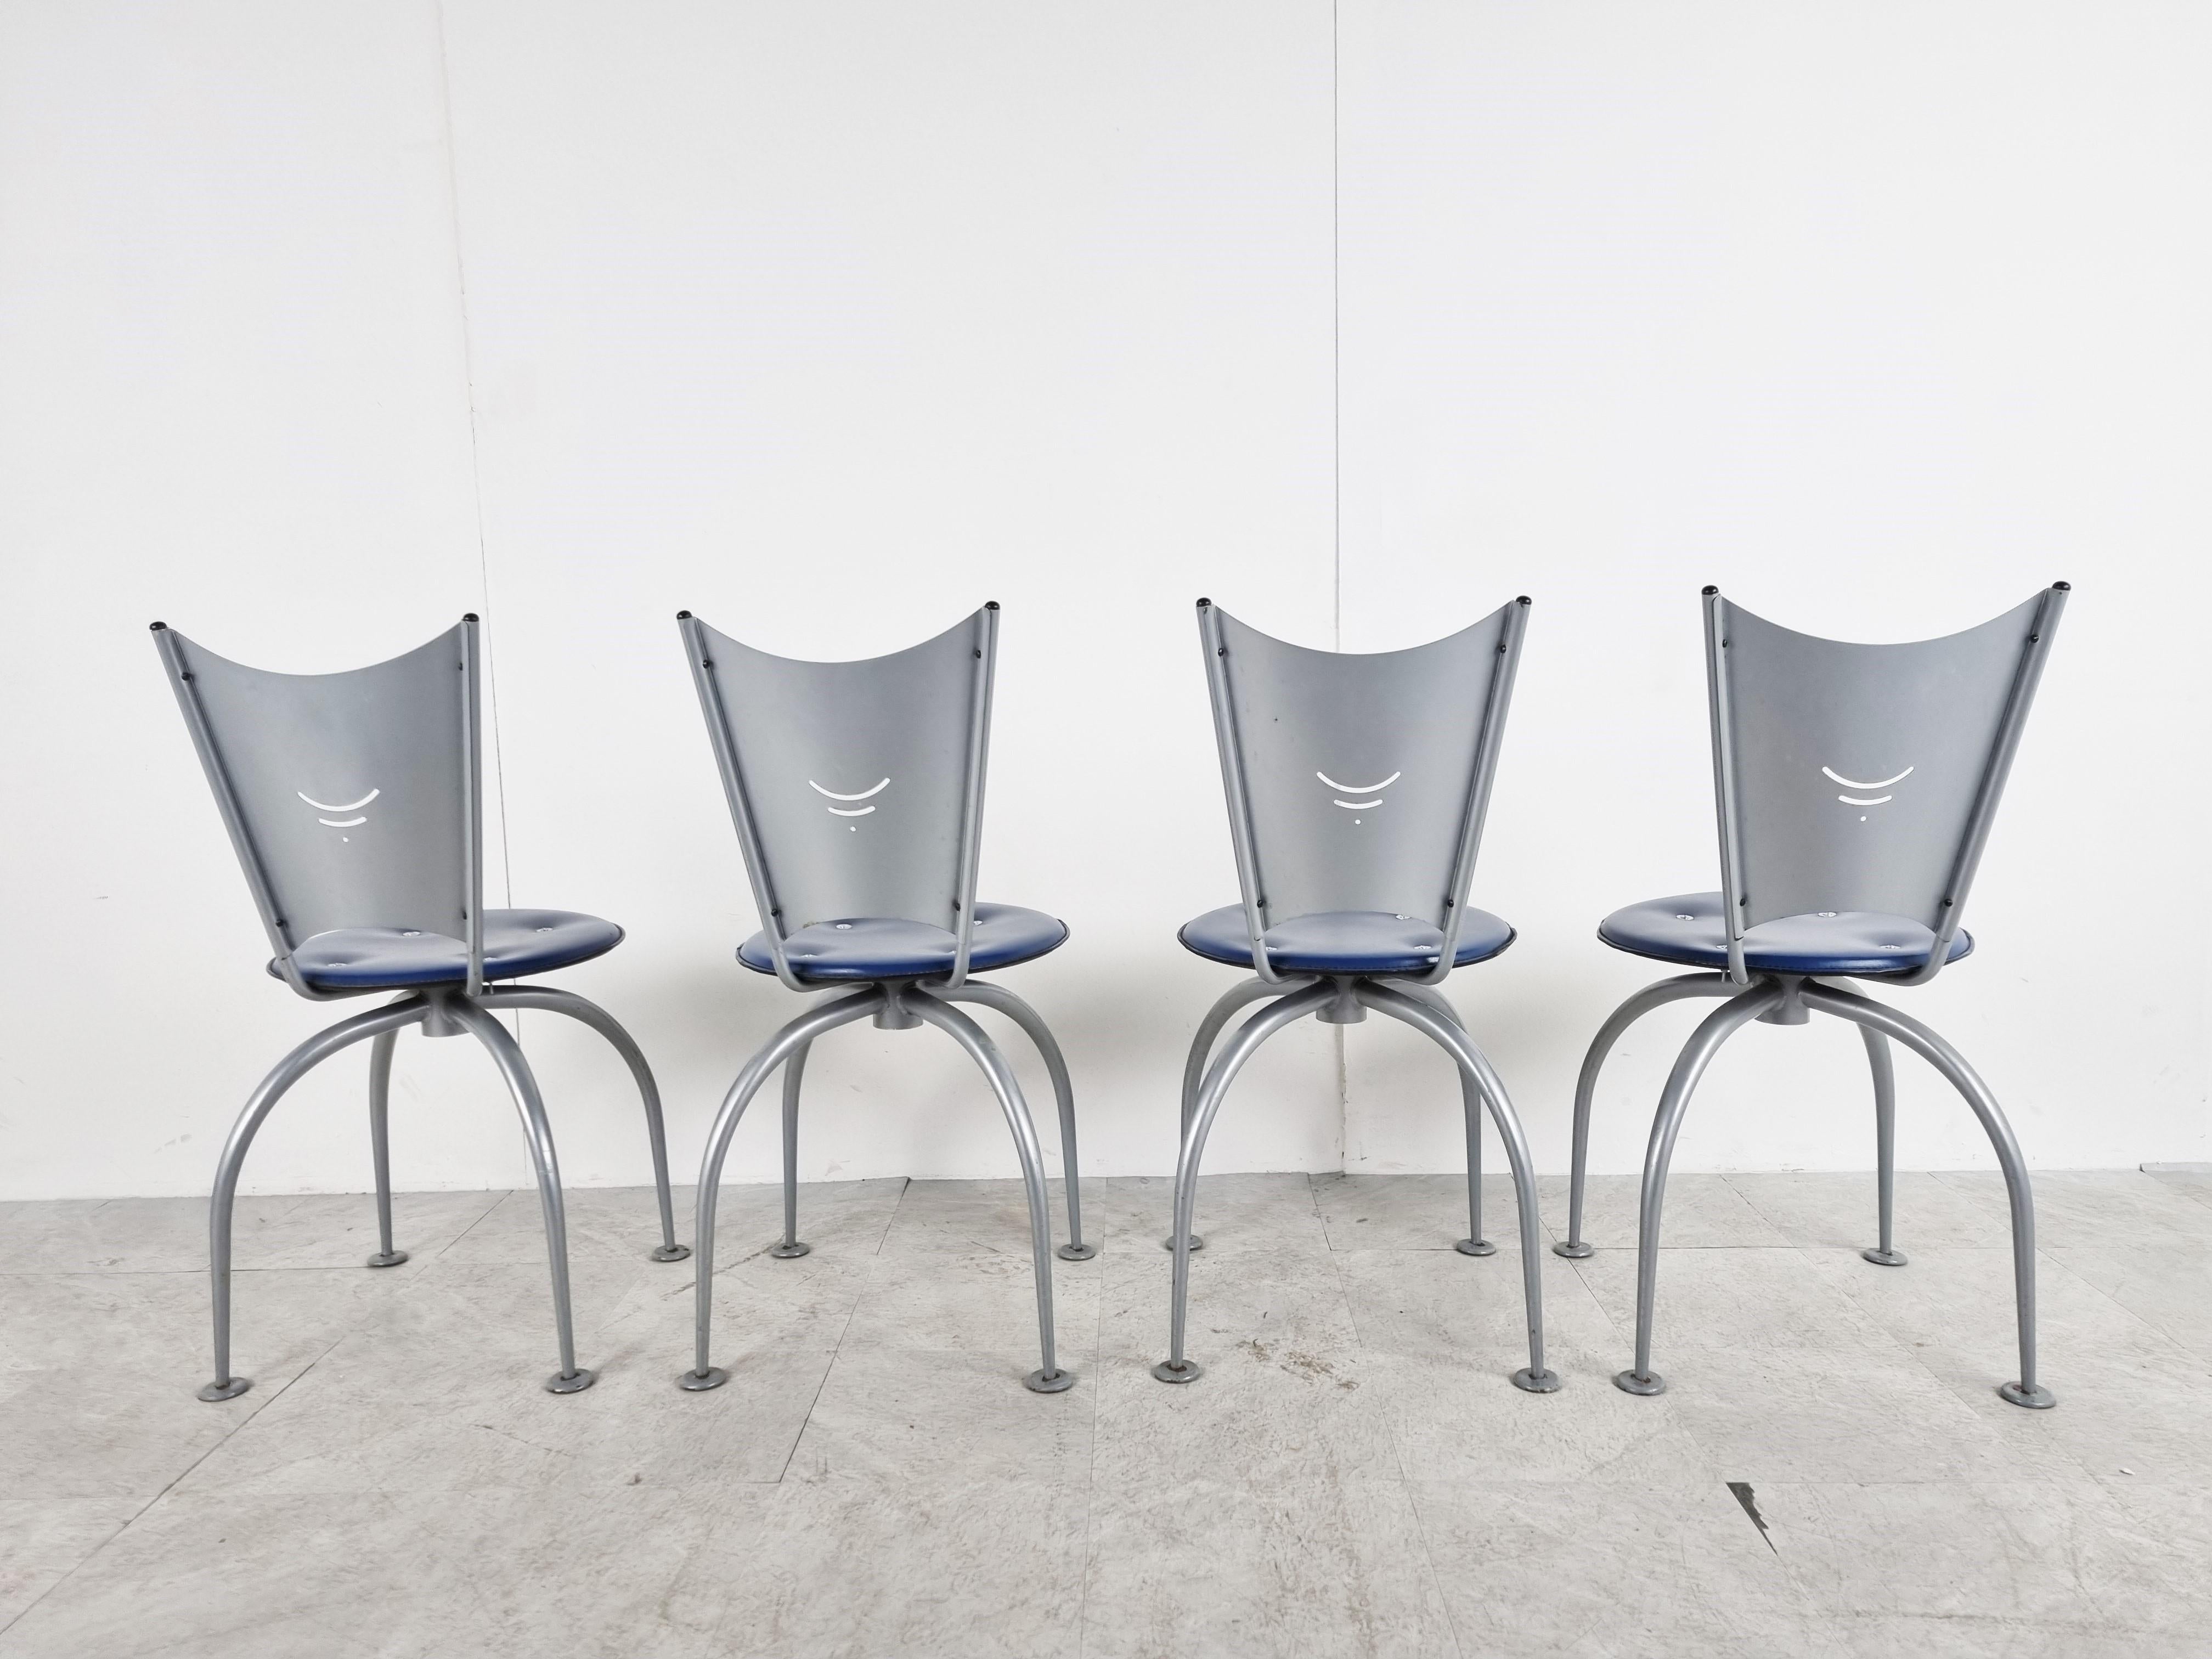 Late 20th Century Post Modern Metal Dining Chairs, 1990s For Sale